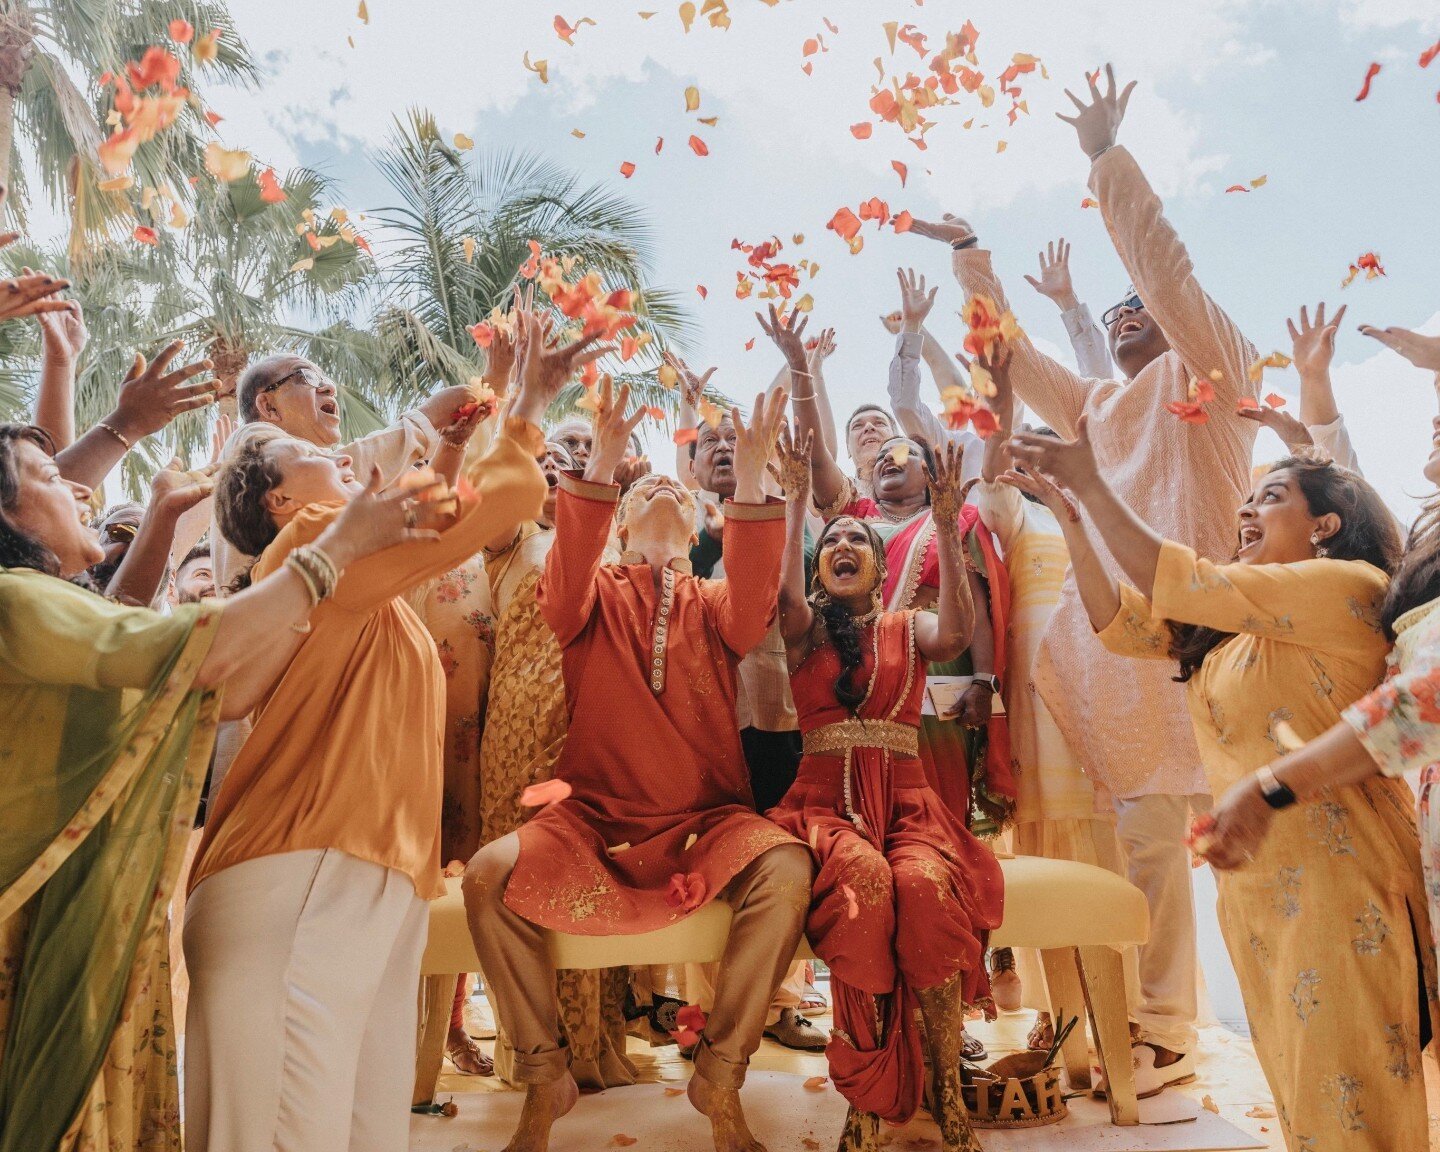 One of our favorite traditions? Hiding your partners name in your mehndi 🫶🥂

Planner: @preminievents @elizabethpriyakumar @danielletlampron
Bride and Groom: @mooshoox3 @dementievalex
Venue: @pganational
Decor: @xquisiteevents
Catering: @cga.events 